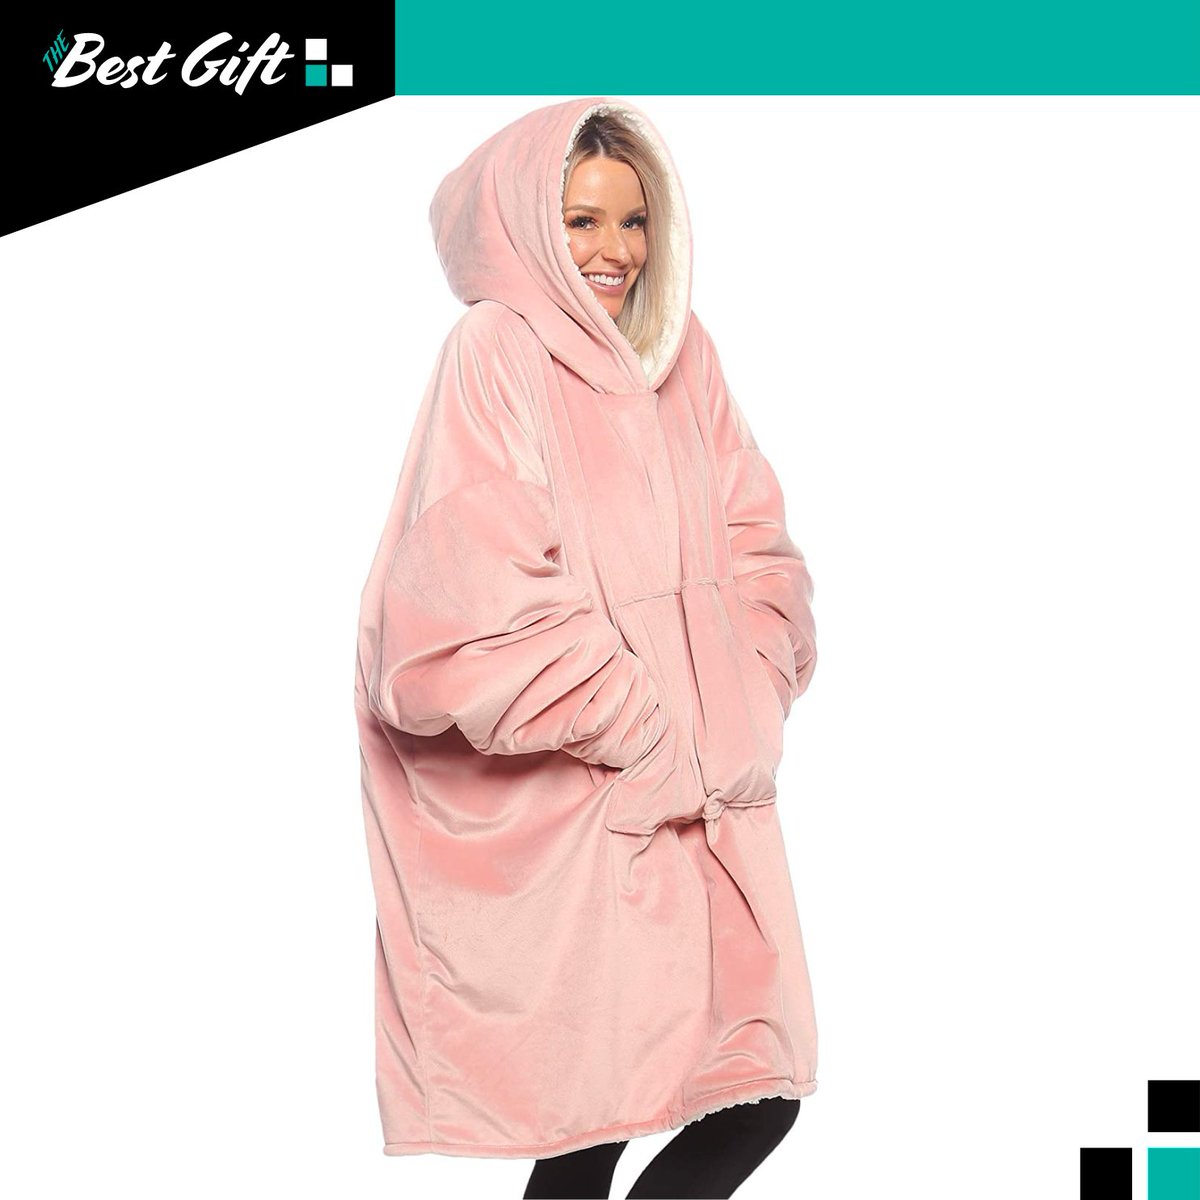 Oversized Microfiber Wearable Blanket 🥶

A giant #sweater for cold #winter days: amazon.com/COMFY-Original…

#gift #bestgift #present #chilli #coldweather #cozy #wearableblanket #wintertime #bithday #warm #soft #softblanket #winterfashion #winterishere #winterstyle #sweaterweather